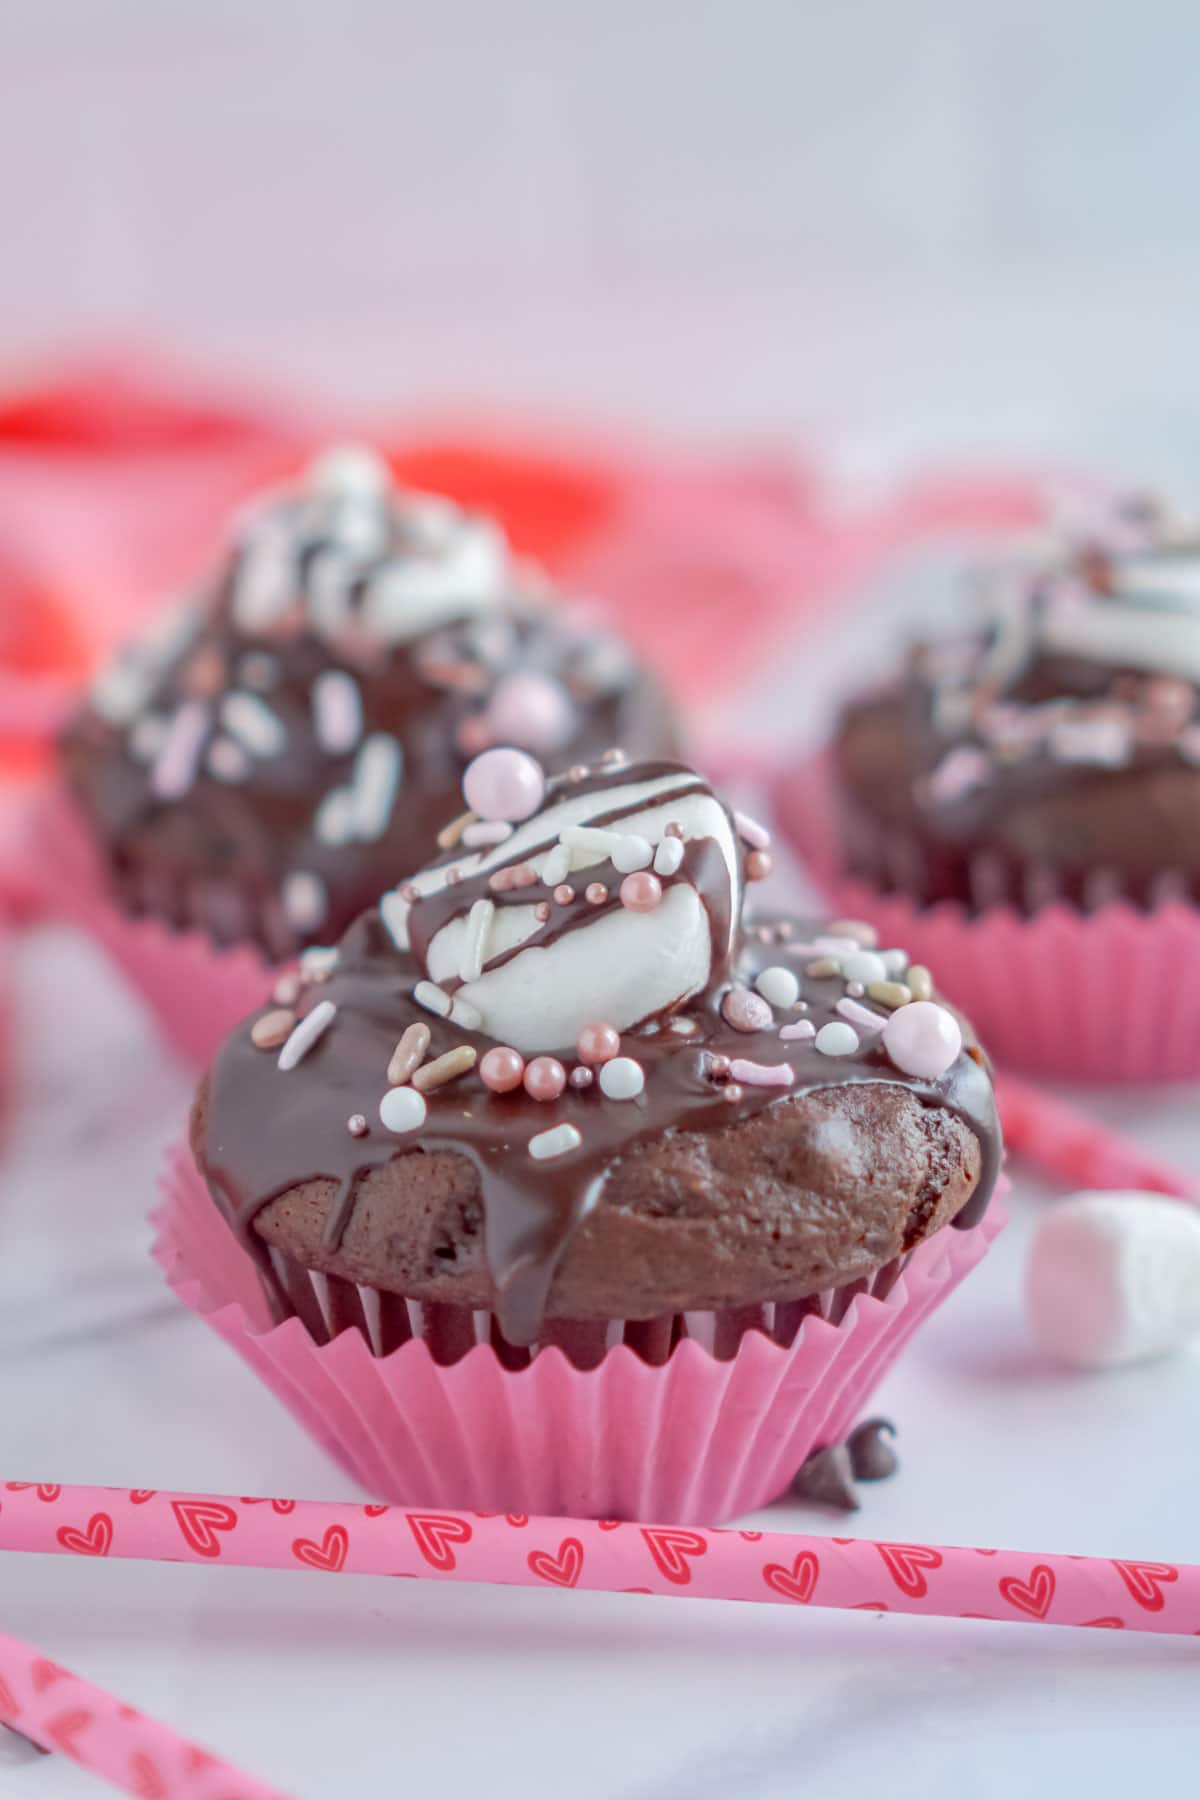 Hot chocolate cupcakes decorated for valentine's day